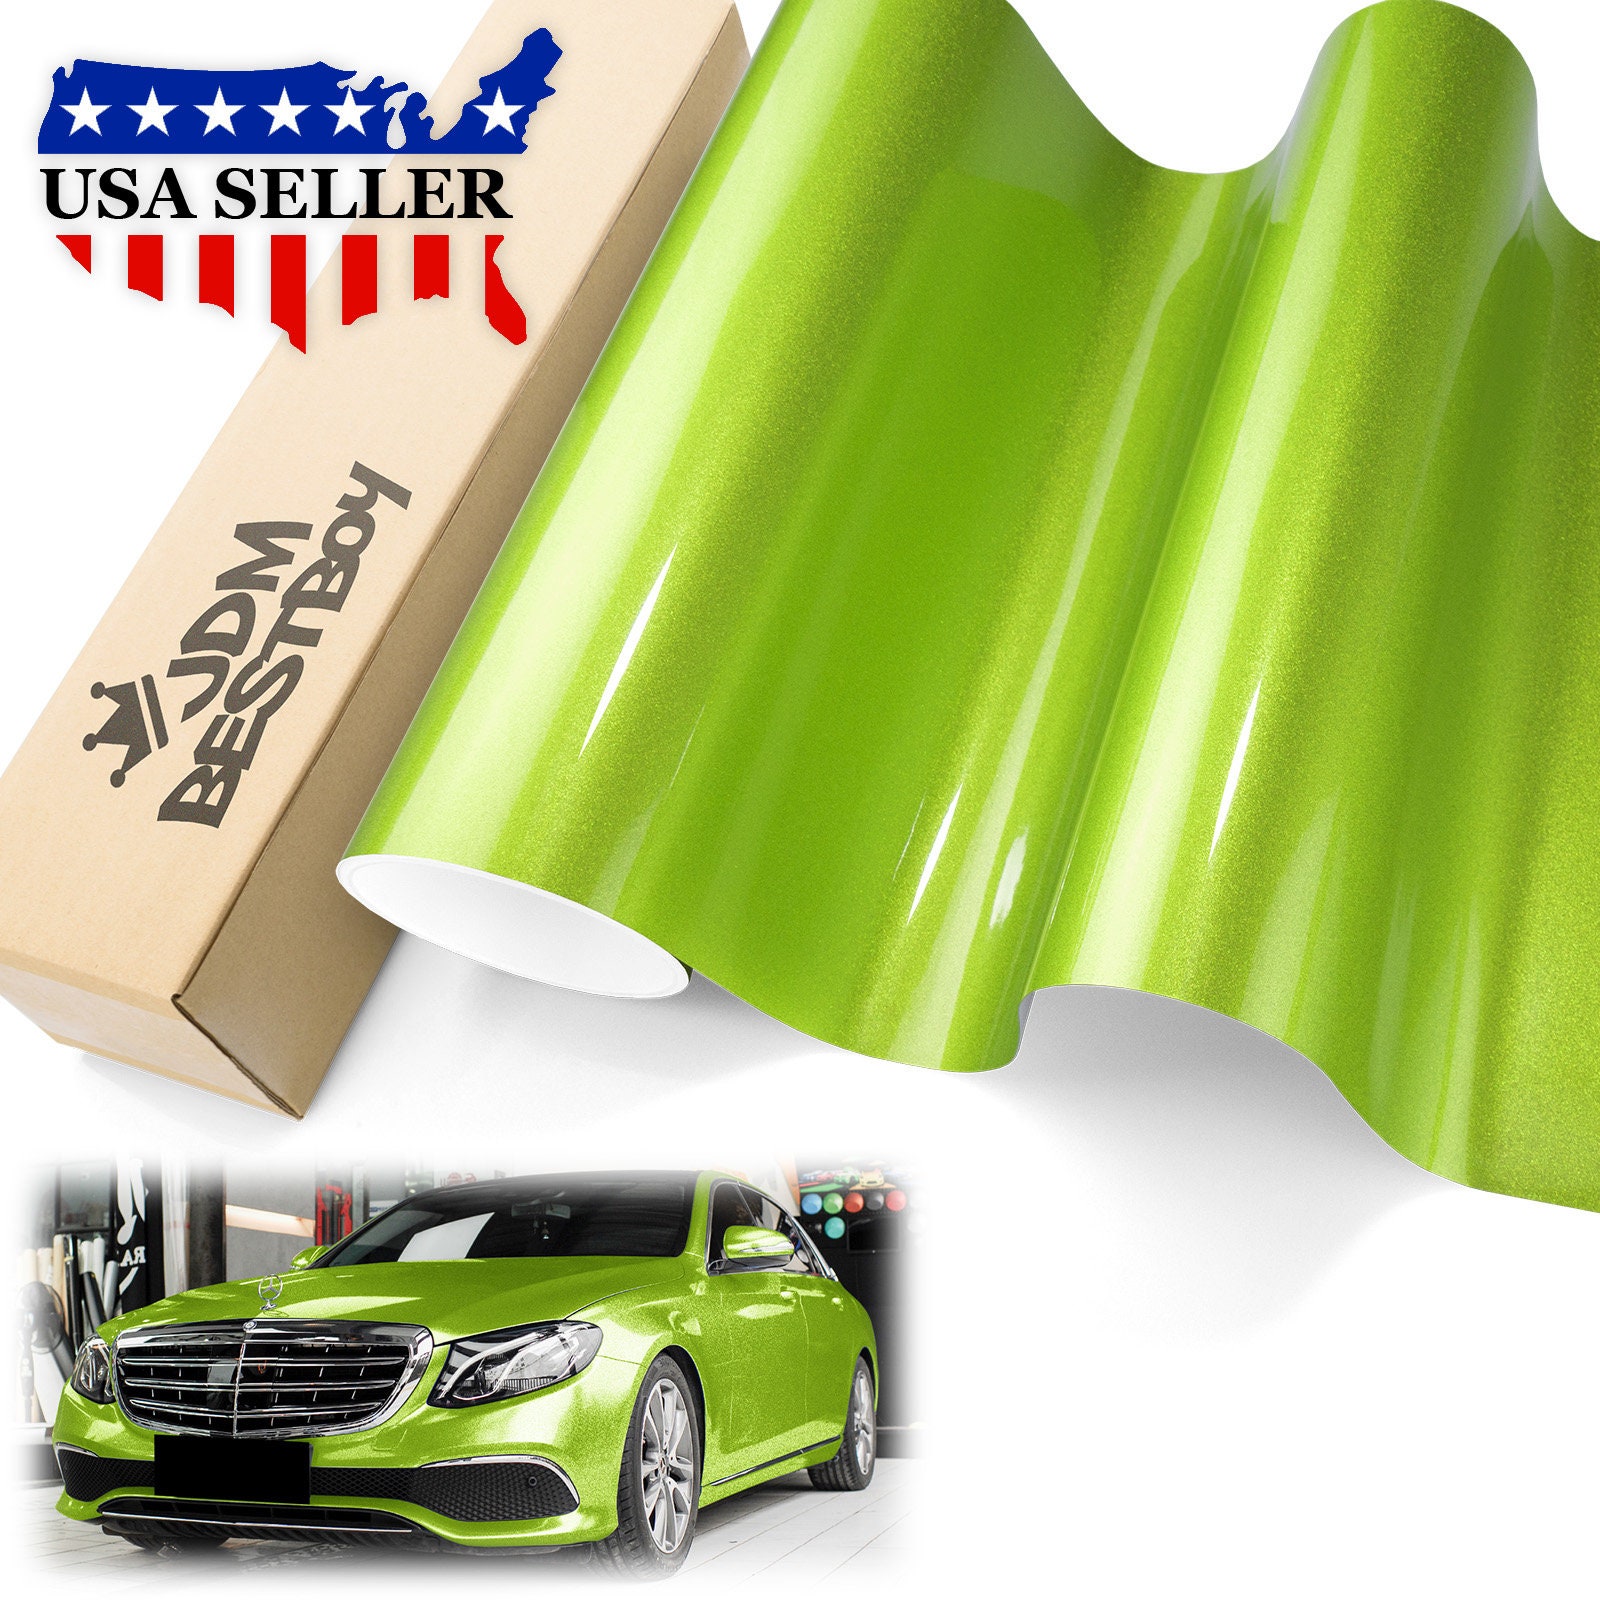 Window Tint Black Turbo Squeegee 4 Rubber Material Car Auto Tinting Film  Tool